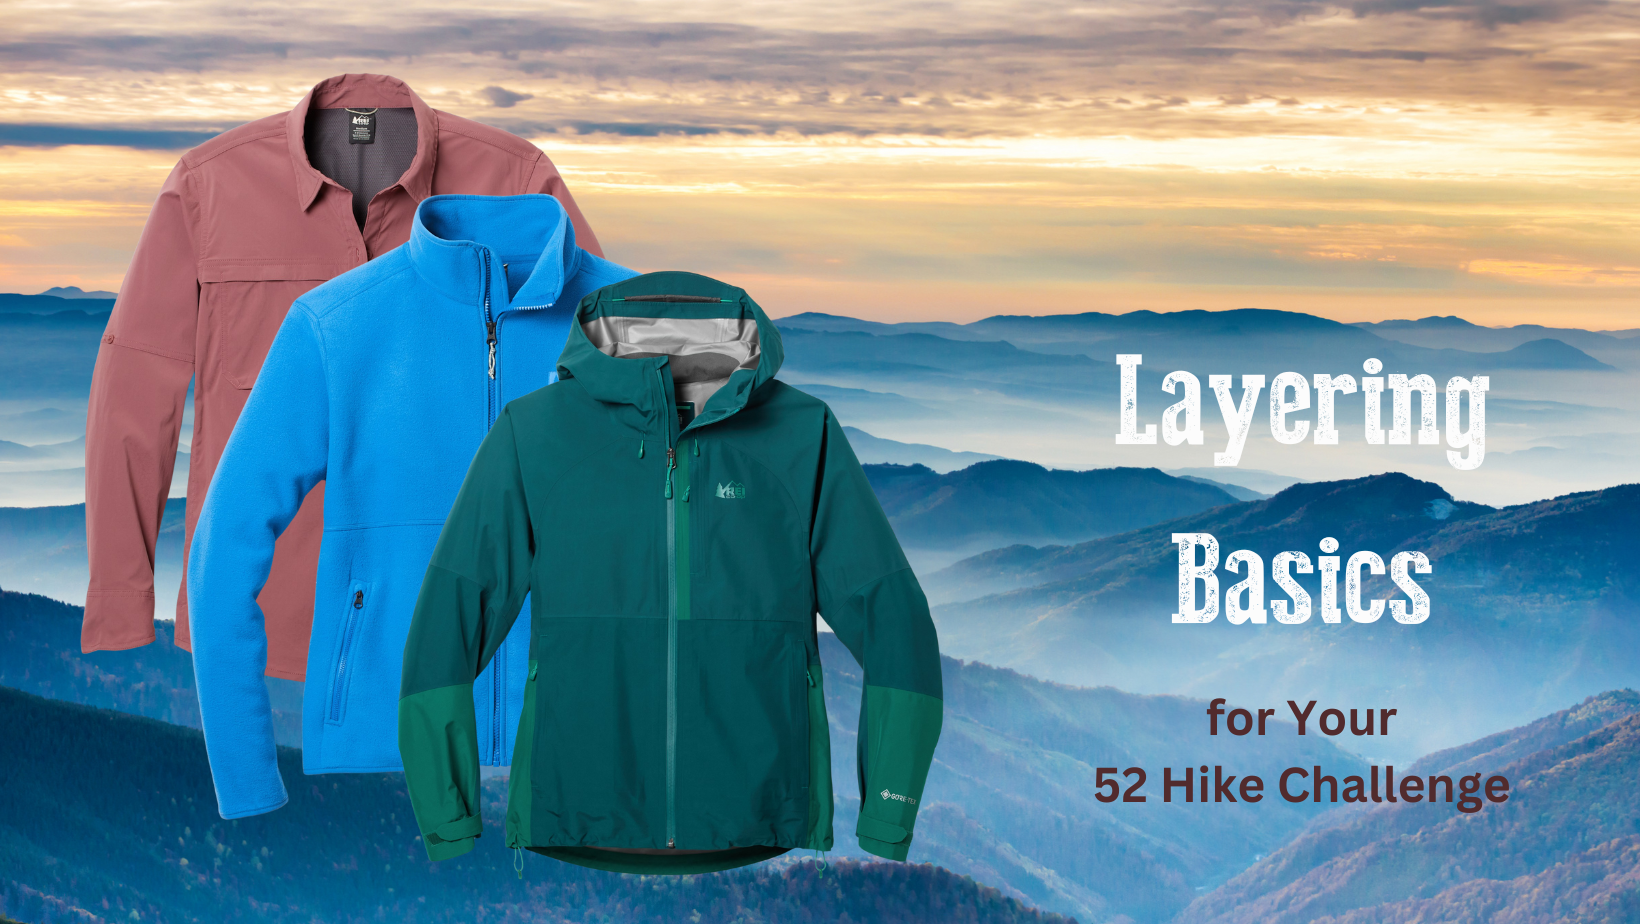 Layering Basics for Your 52 Hike Challenge